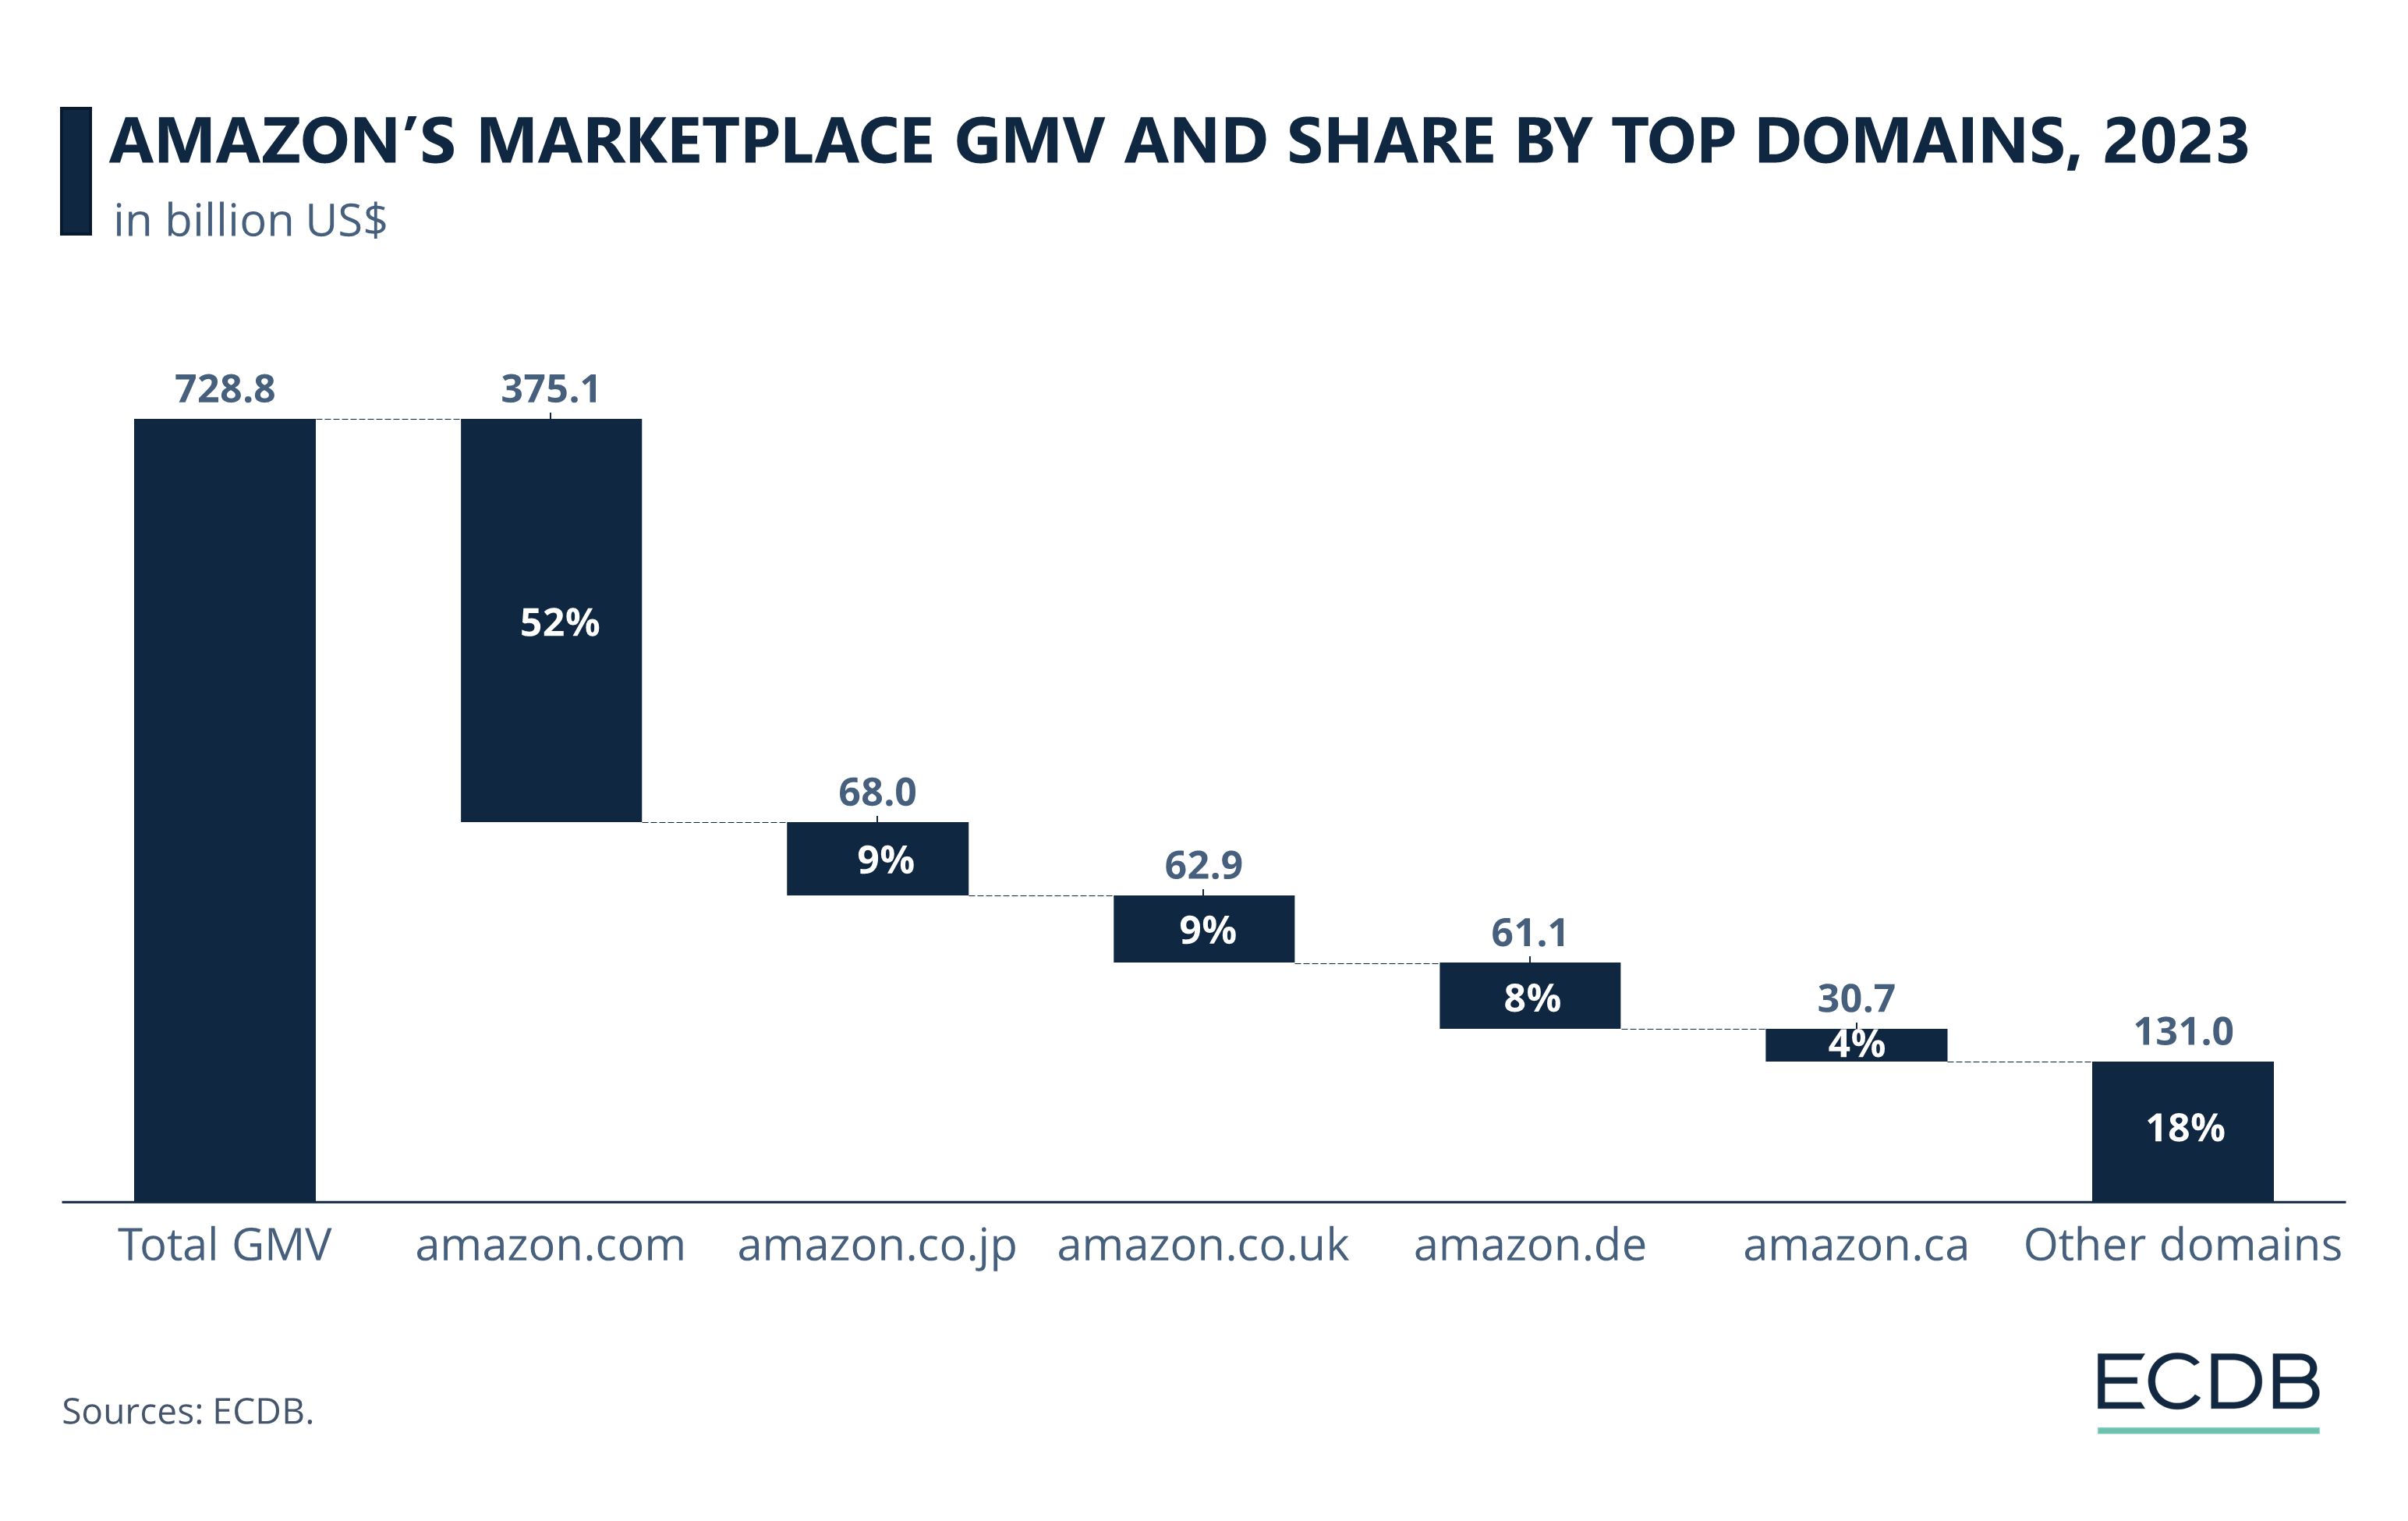 Amazon's Marketplace GMV and Share by Top Domains, 2022